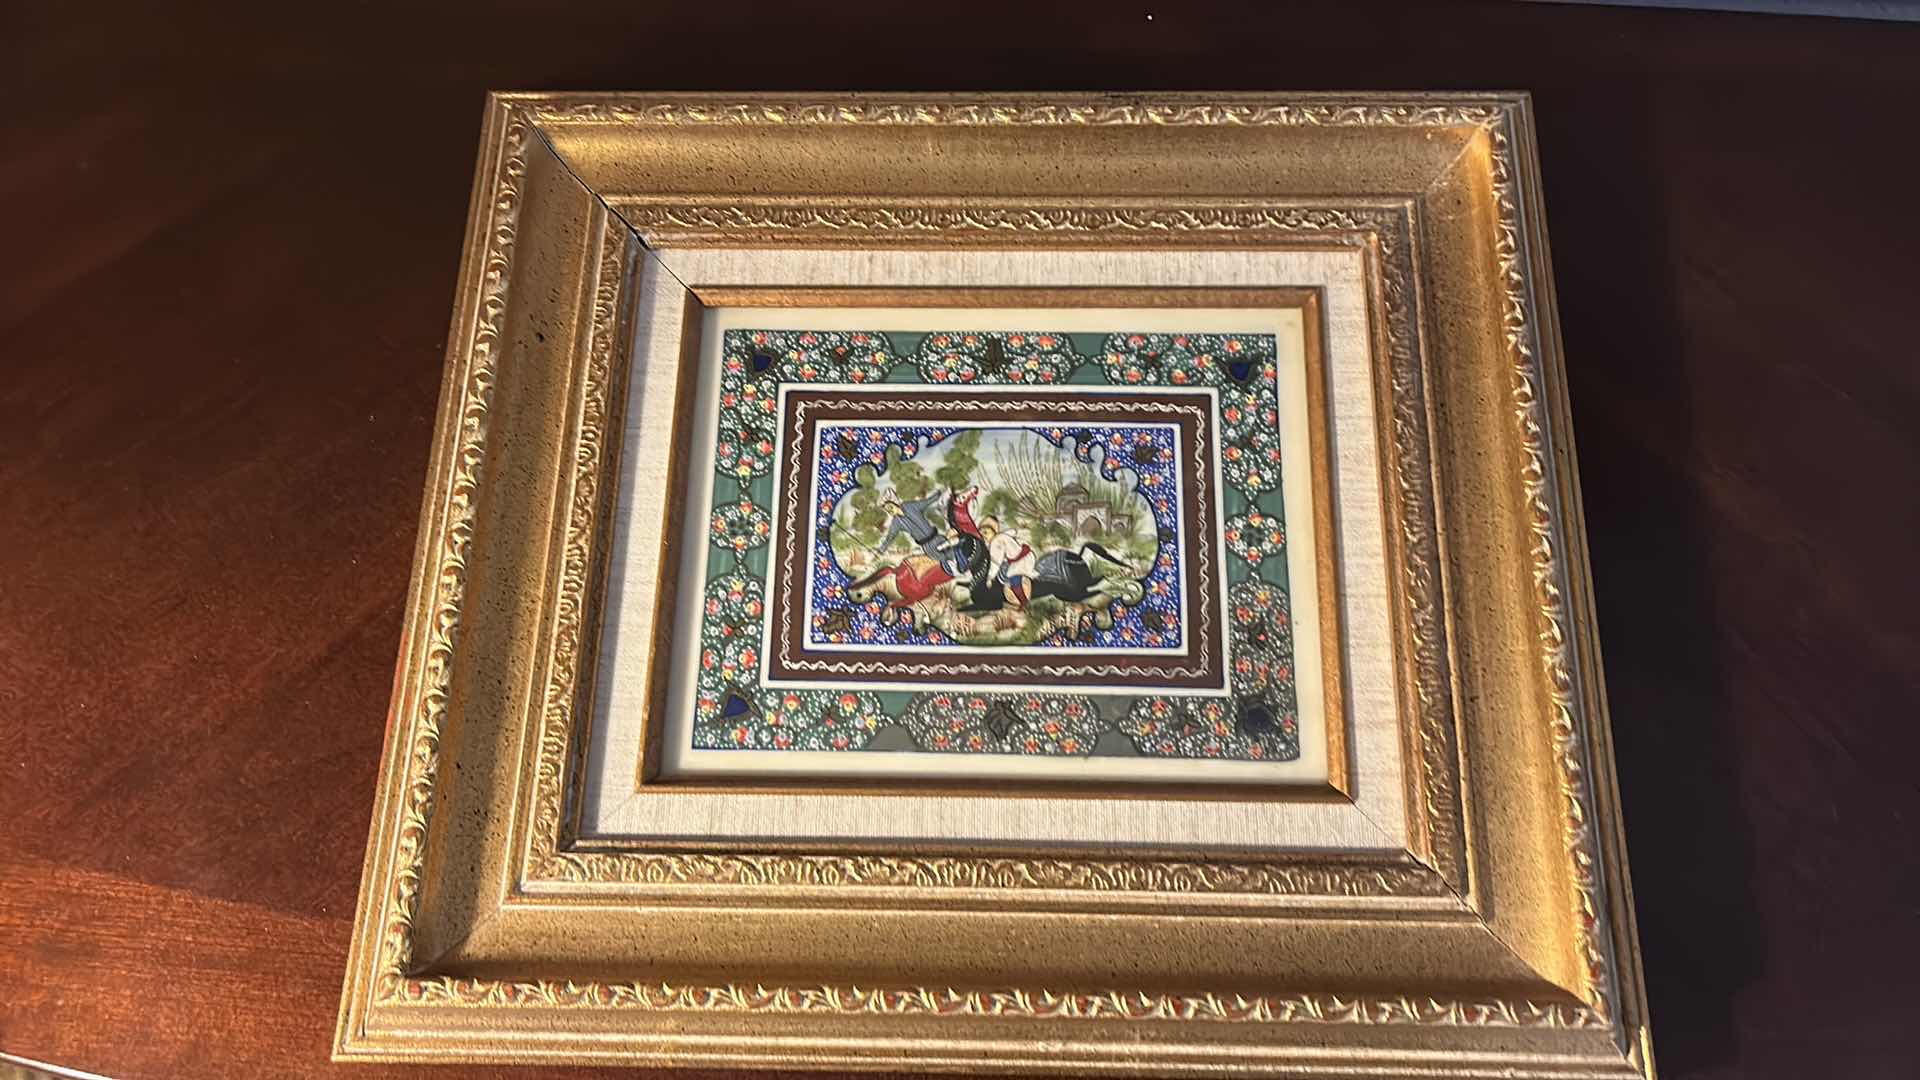 Photo 1 of WALL DECOR -“POLO MATCH” ORNATE GOLD FRAMED 17 1/2” x 15 1/2”